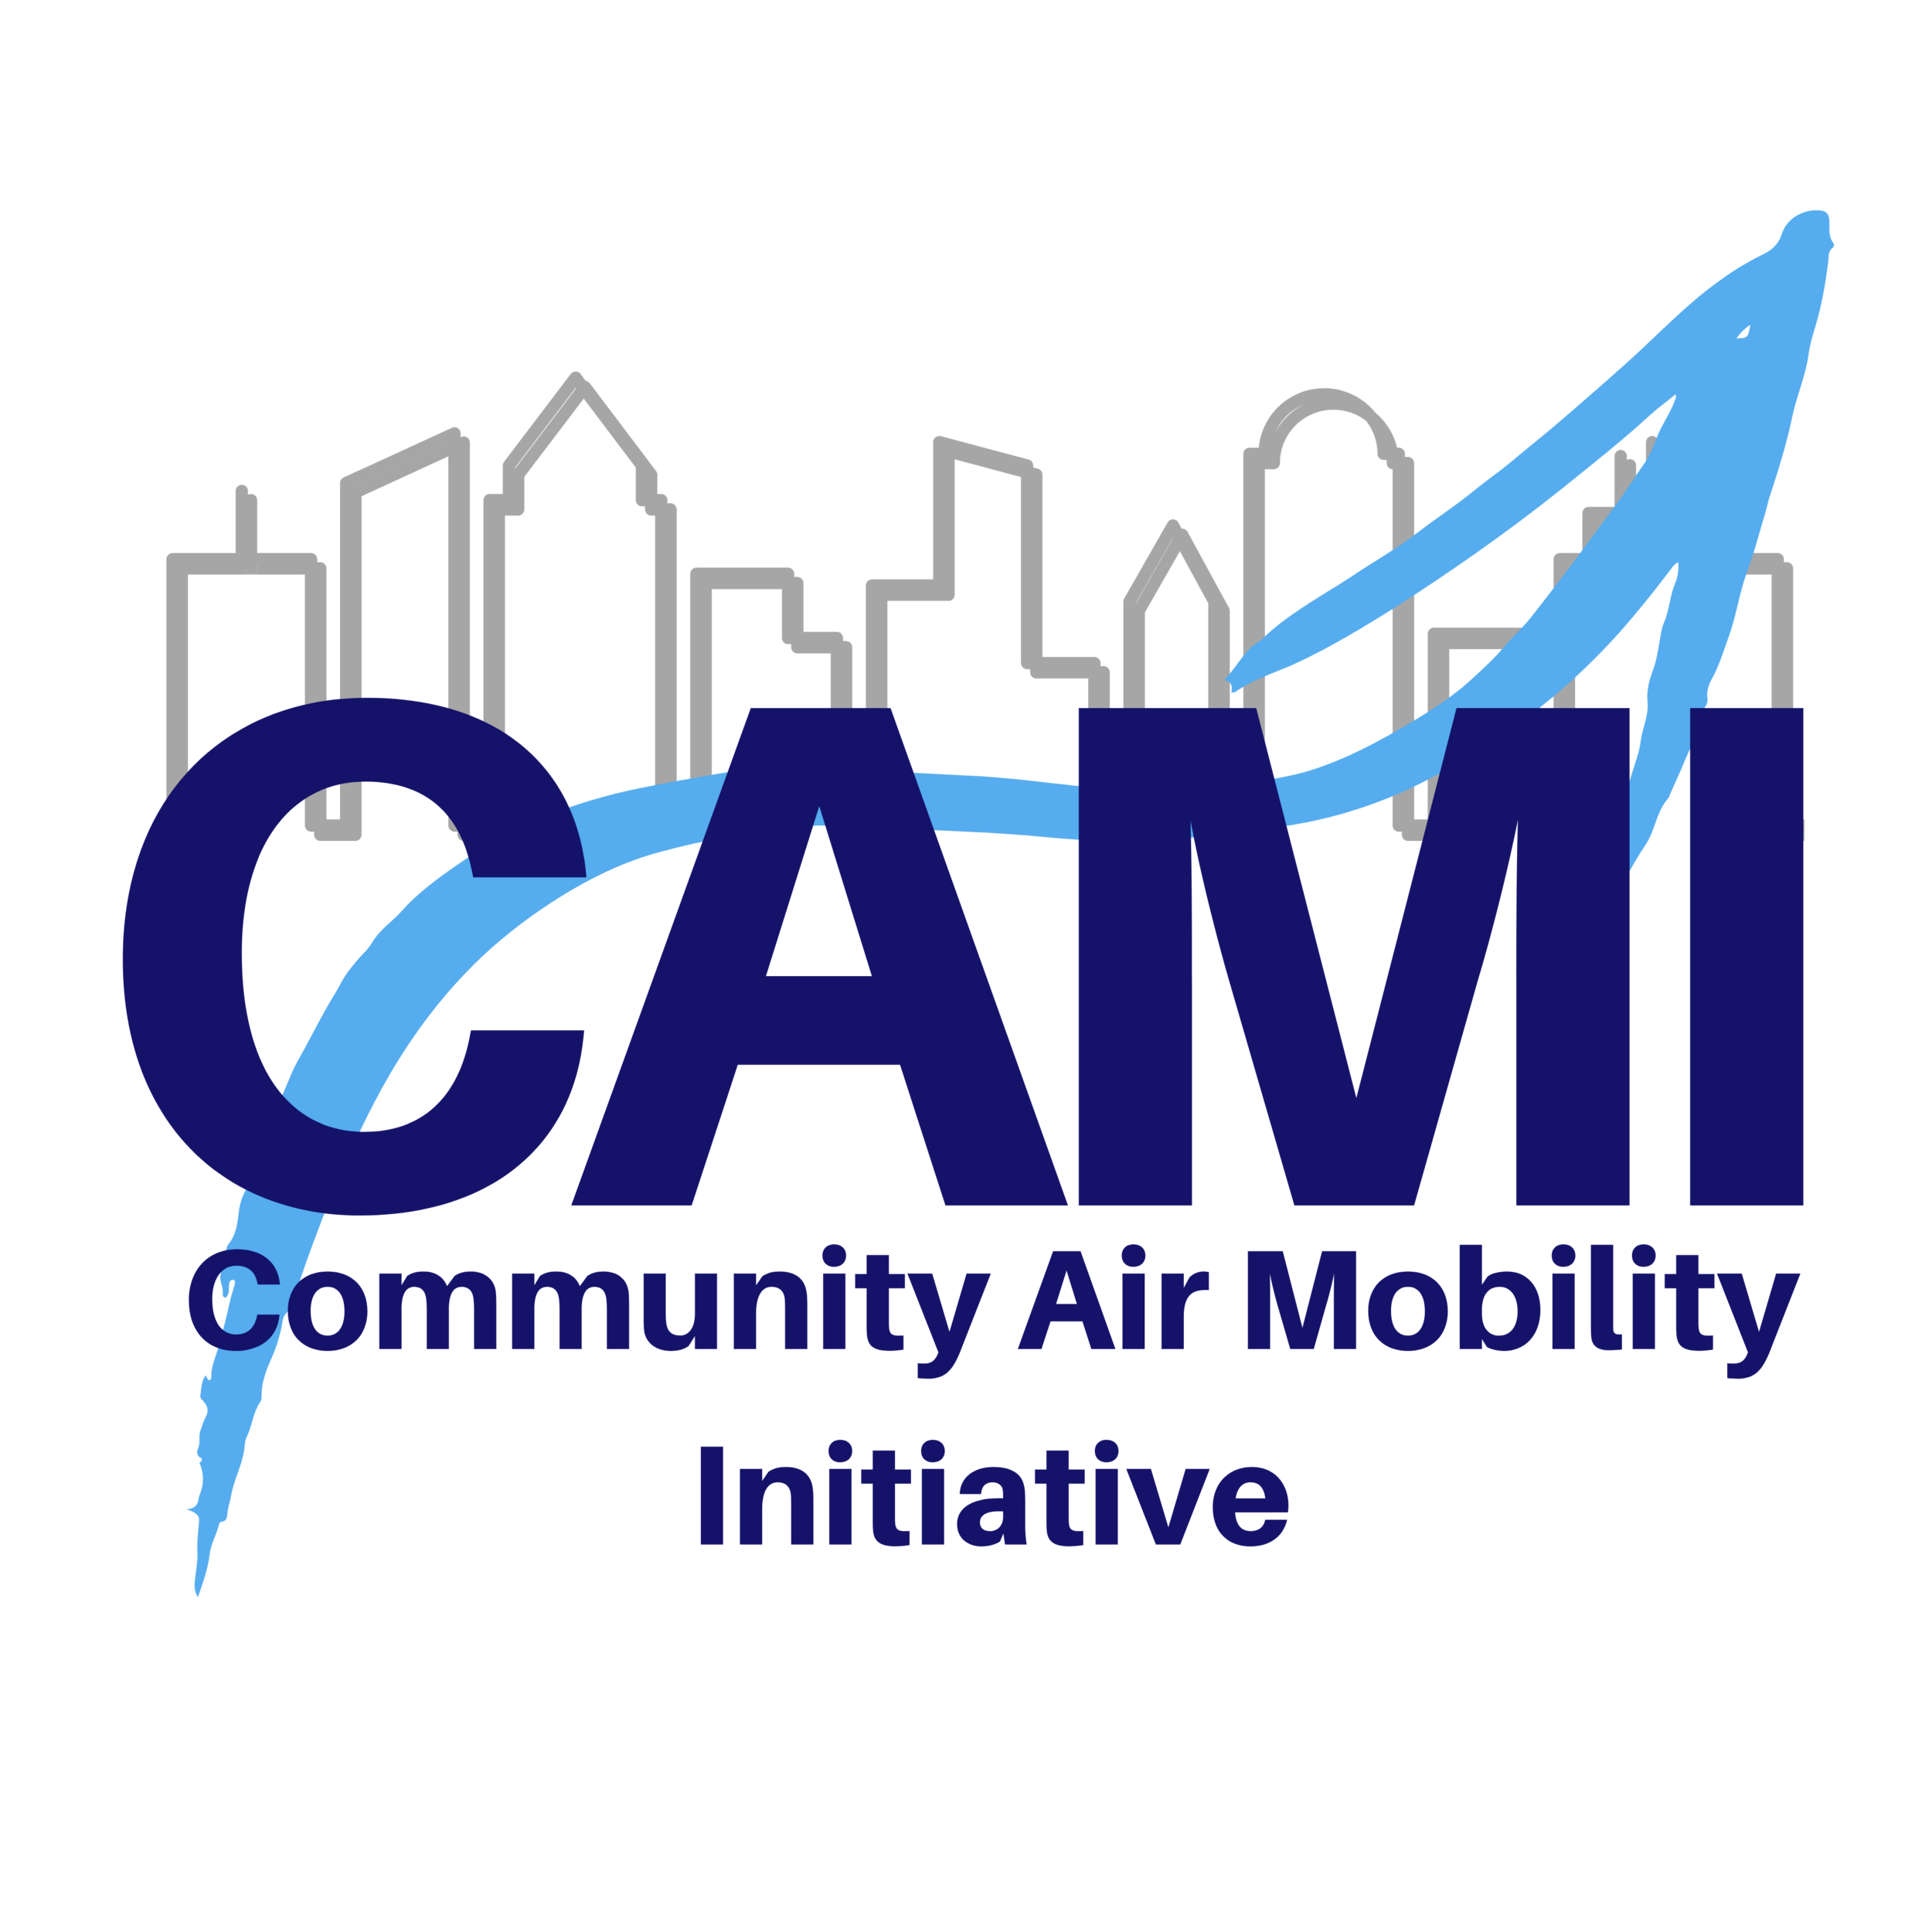 Community Air Mobility Initiative